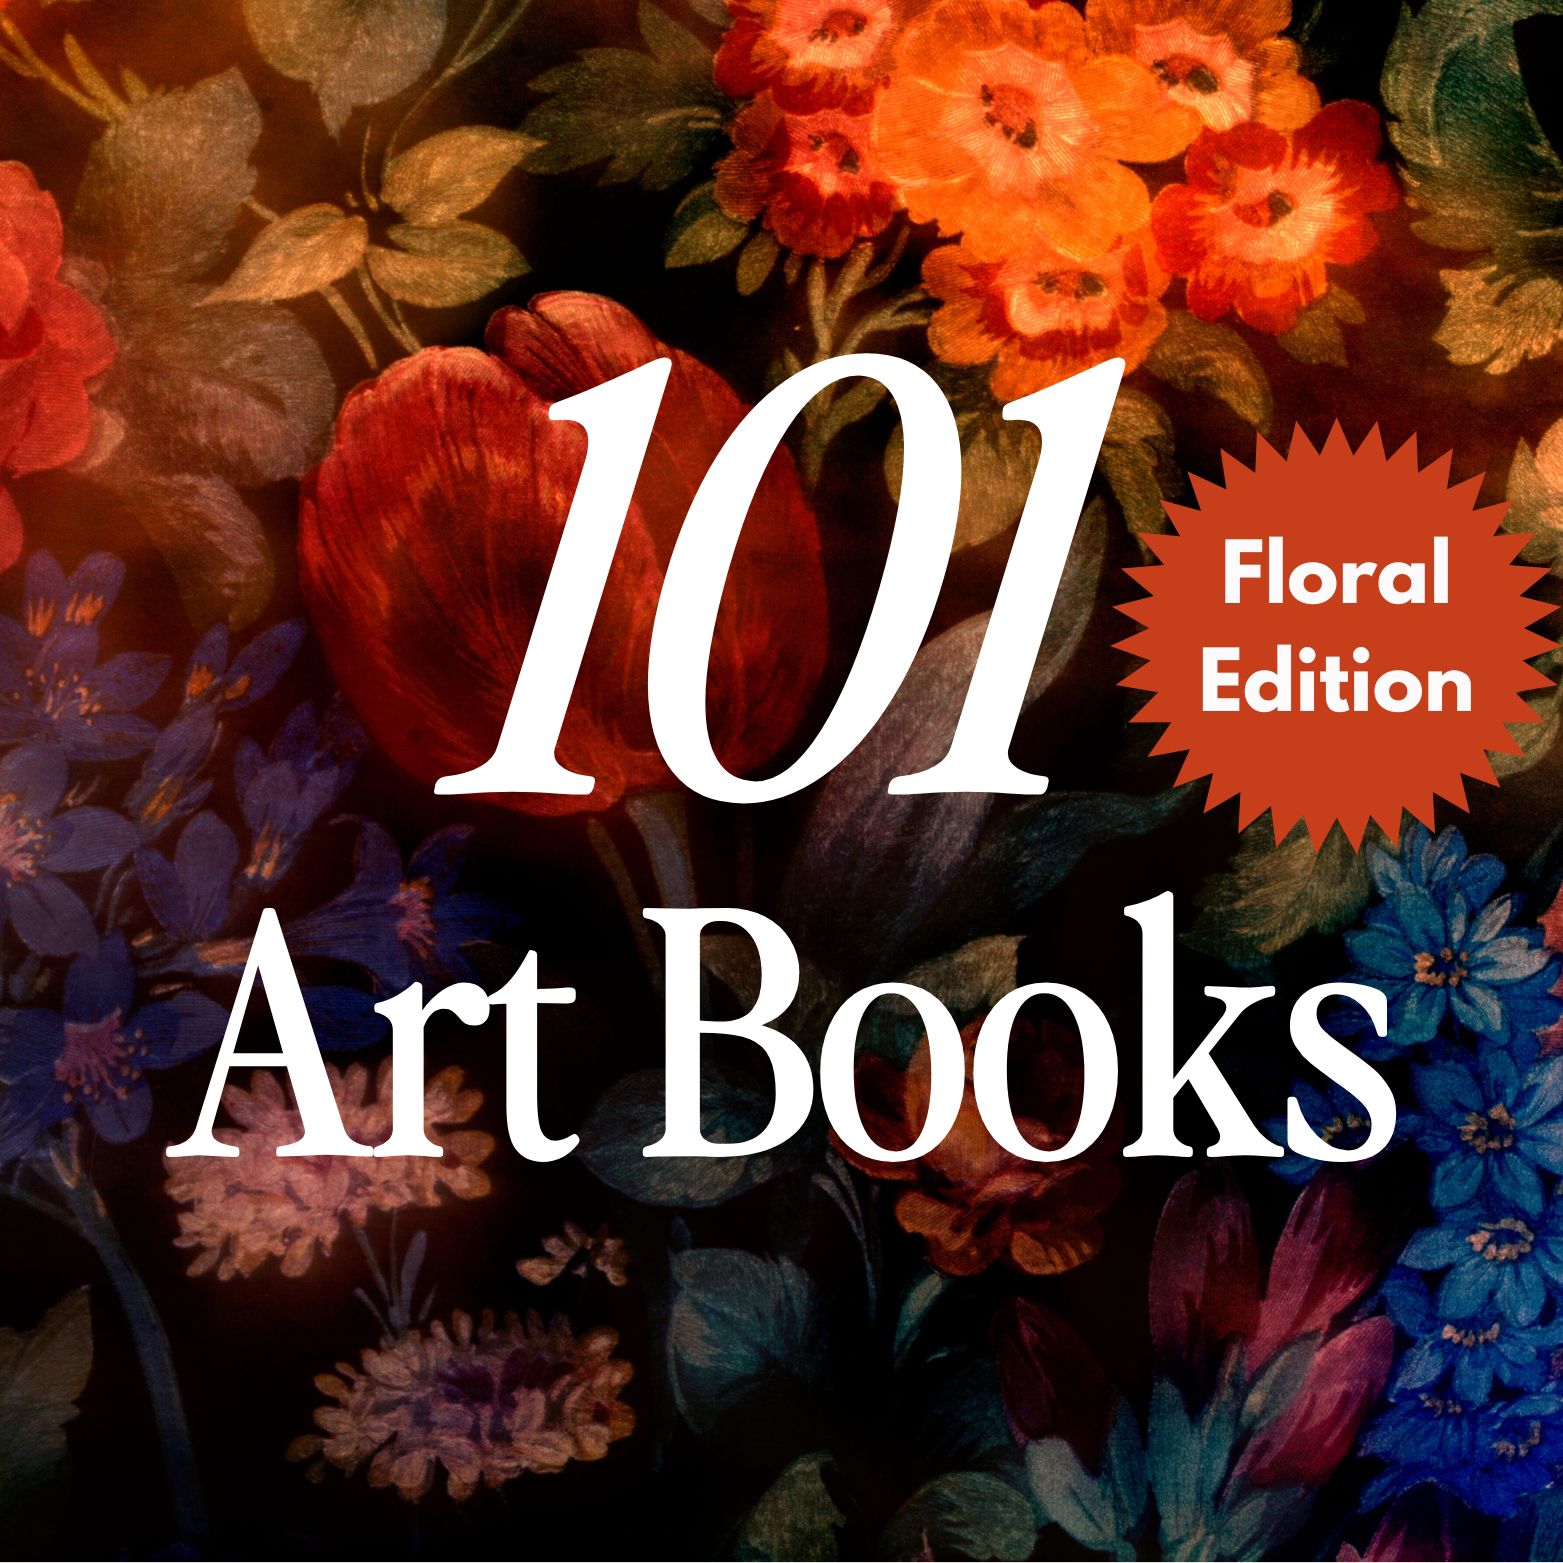 FLORAL FANTASIES: Call for Entries